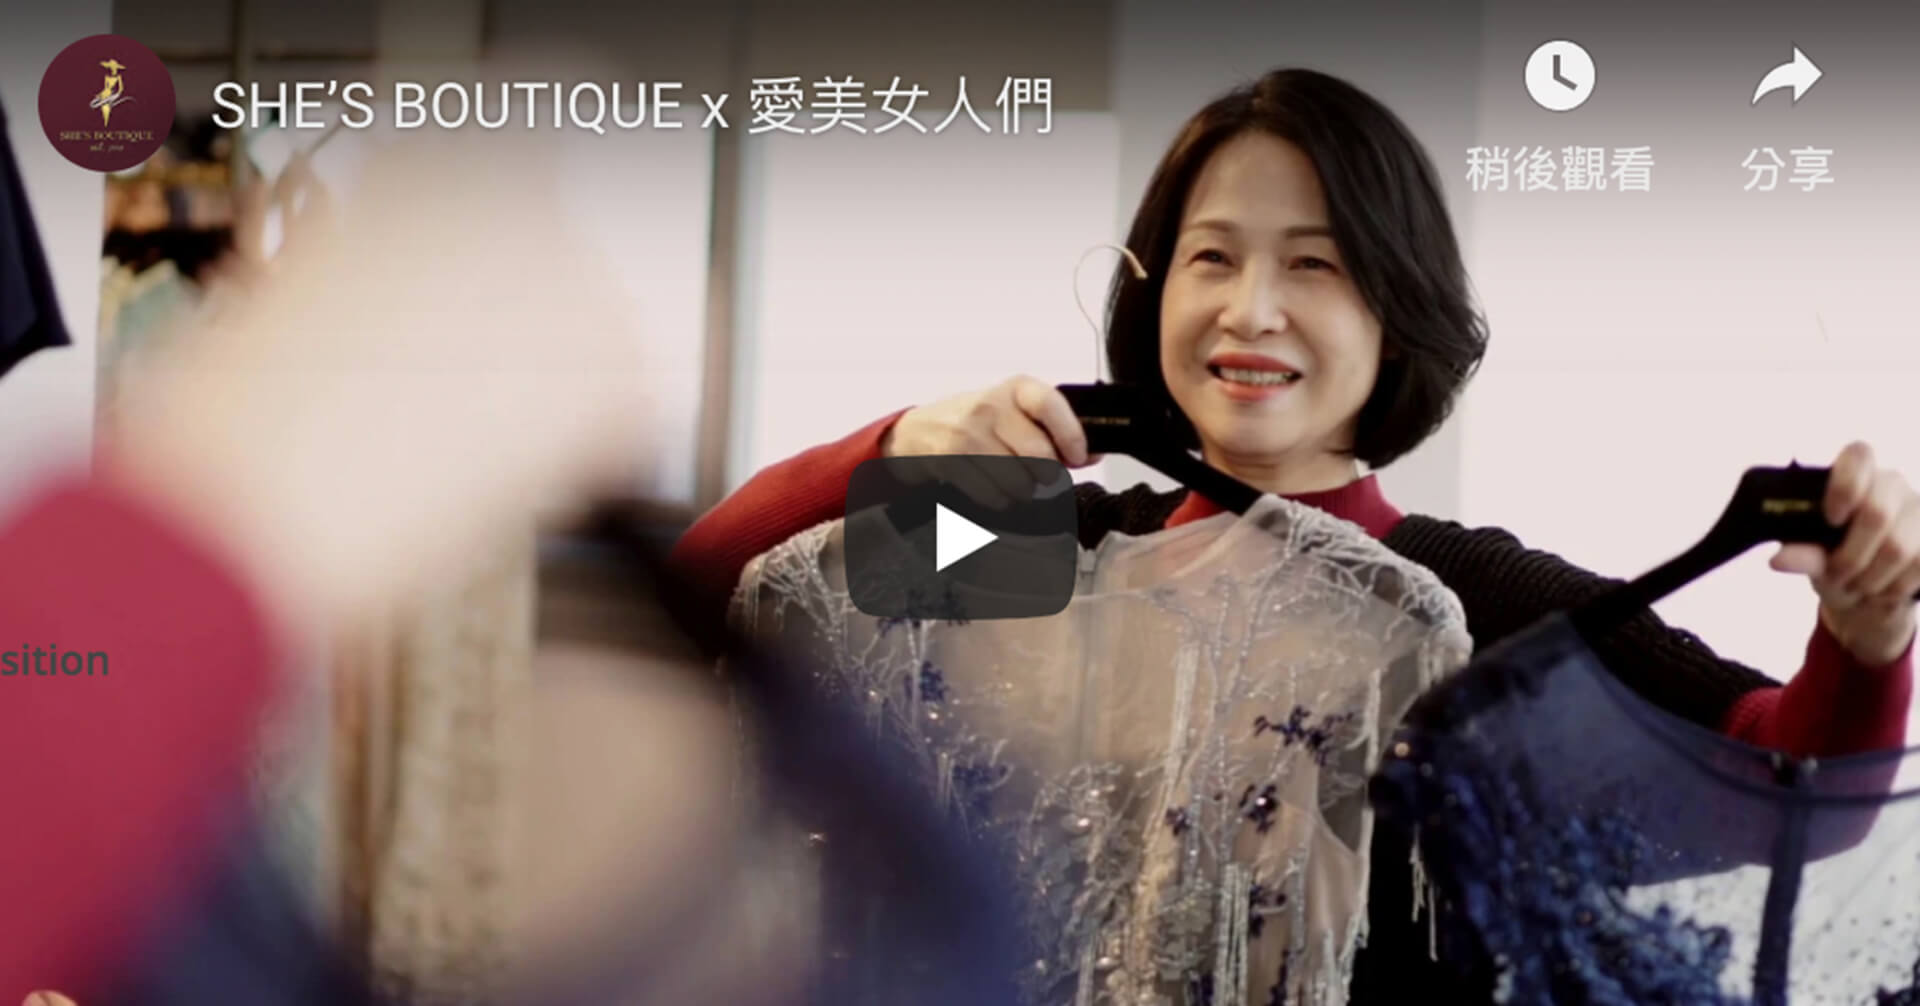 SHE’S BOUTIQUE x 愛美女人們